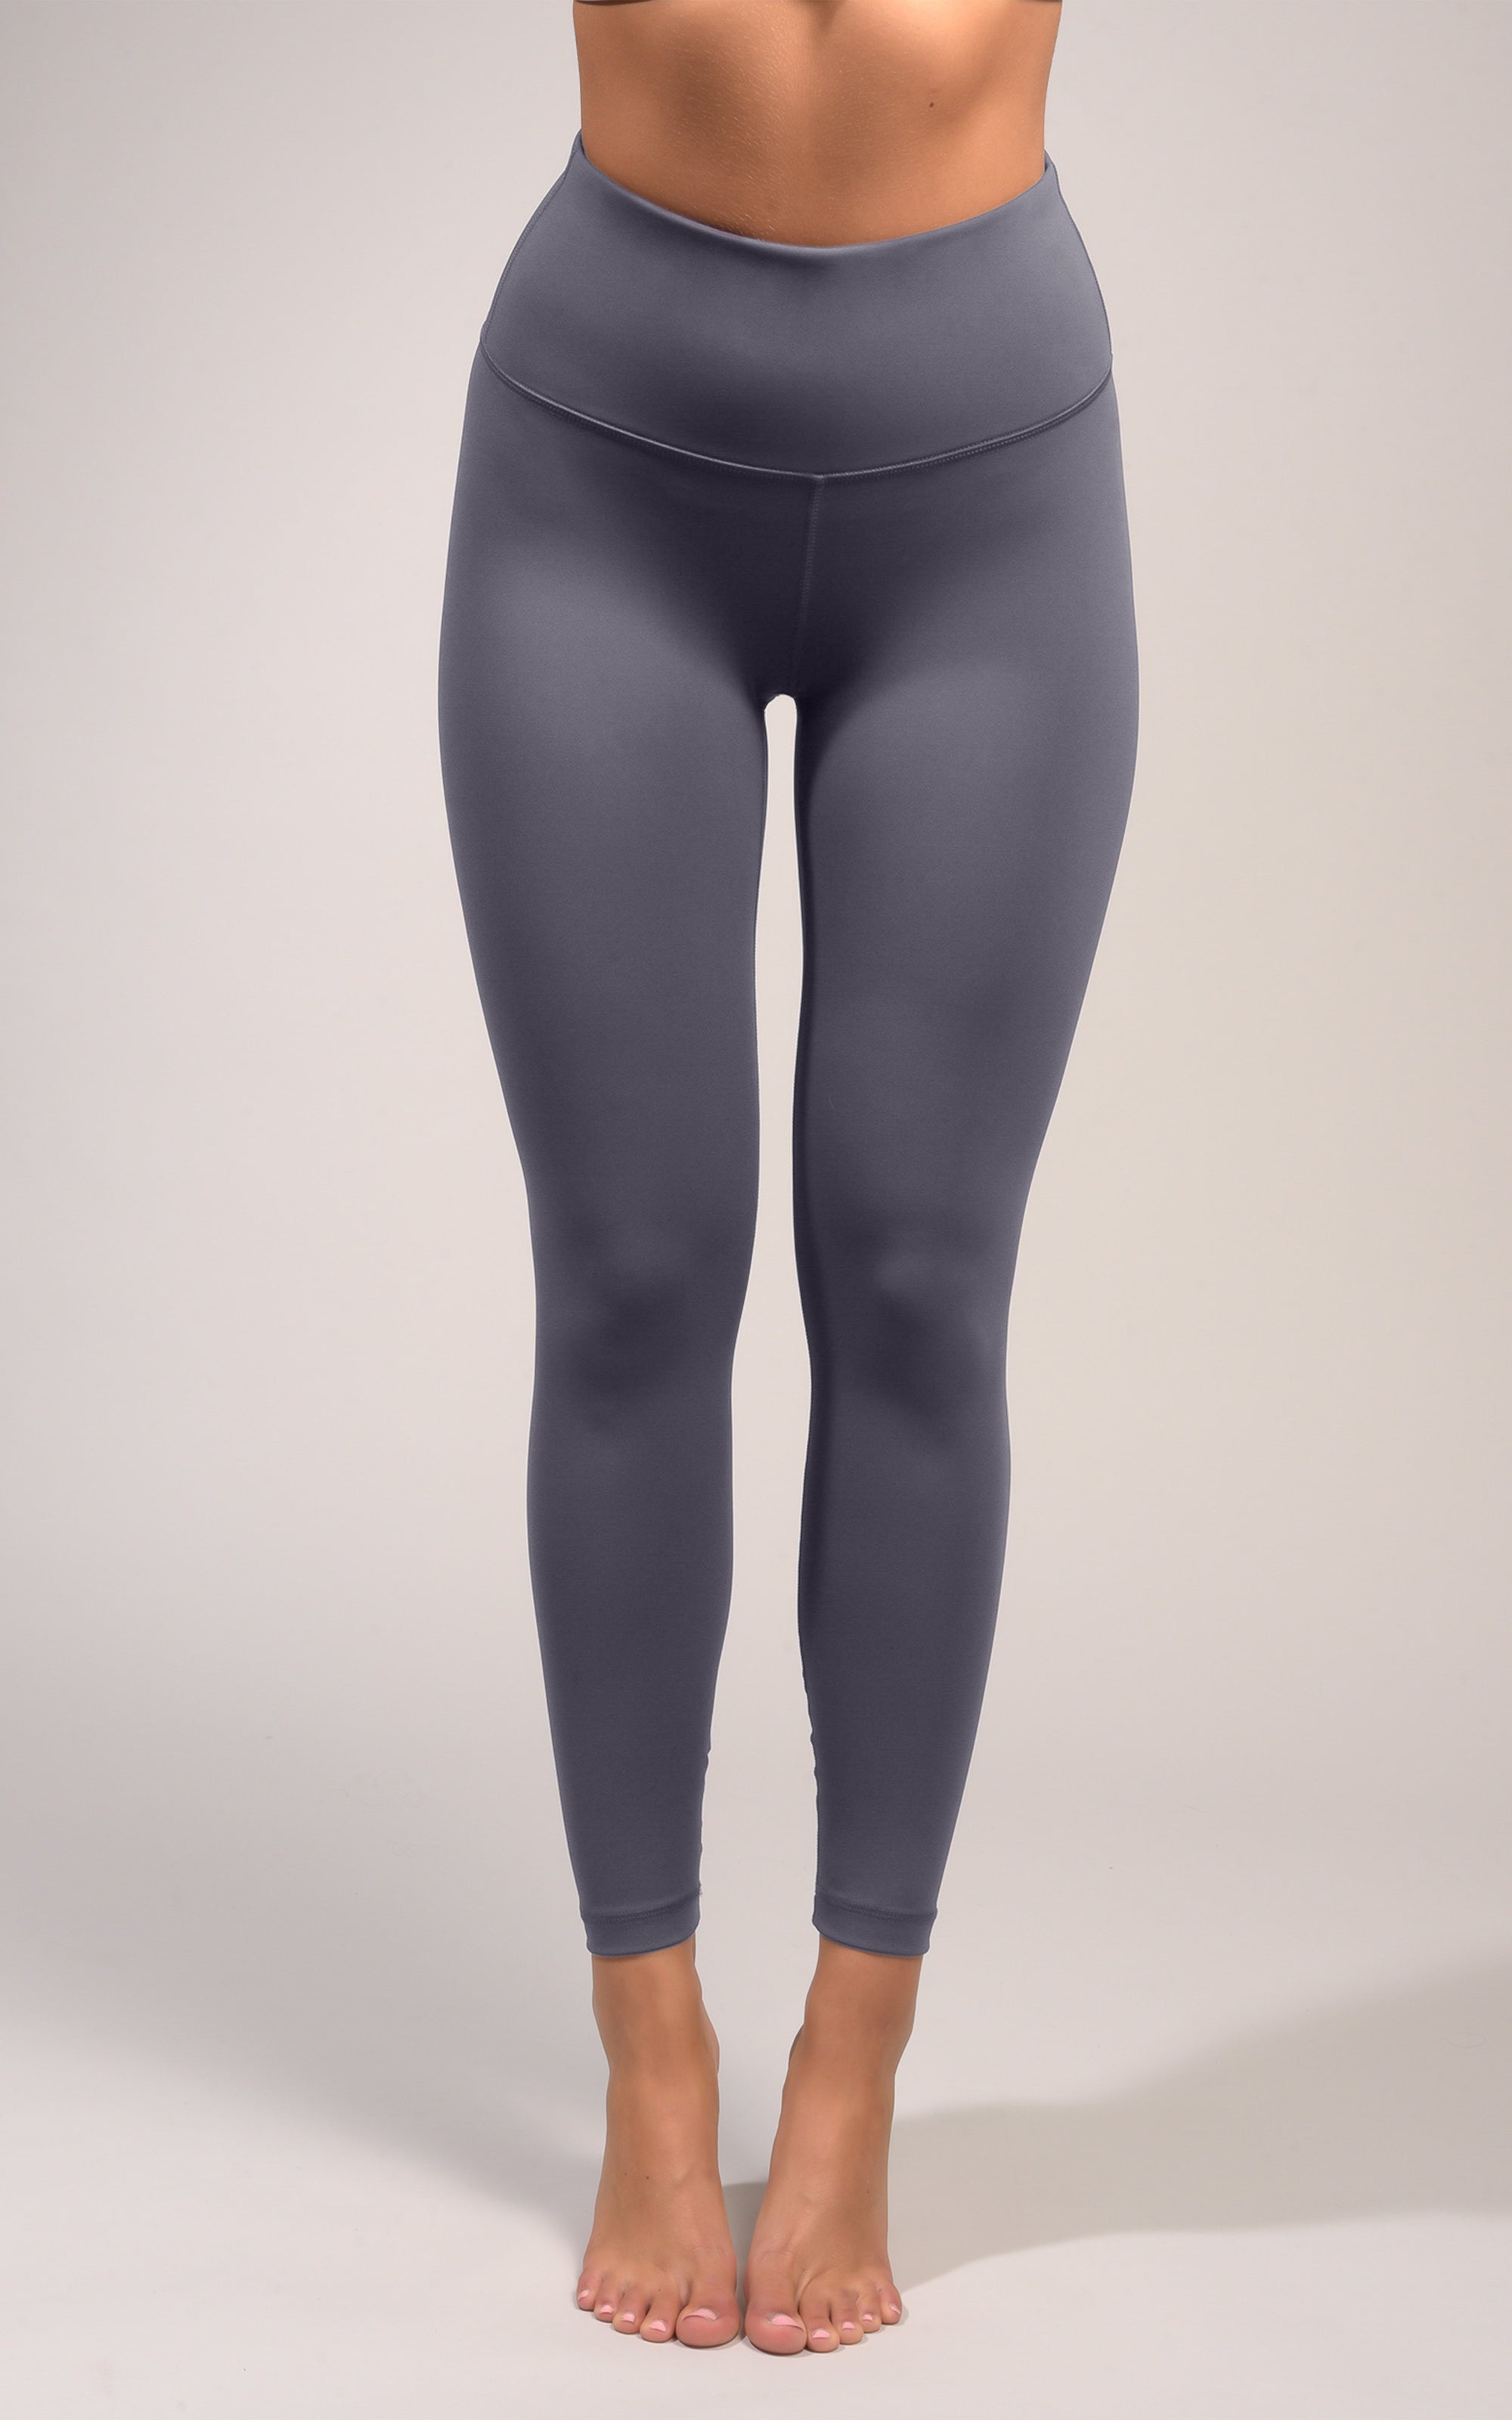 90 Degrees by Reflex Leggings Pink Size XS - $12 (33% Off Retail) - From  paulina